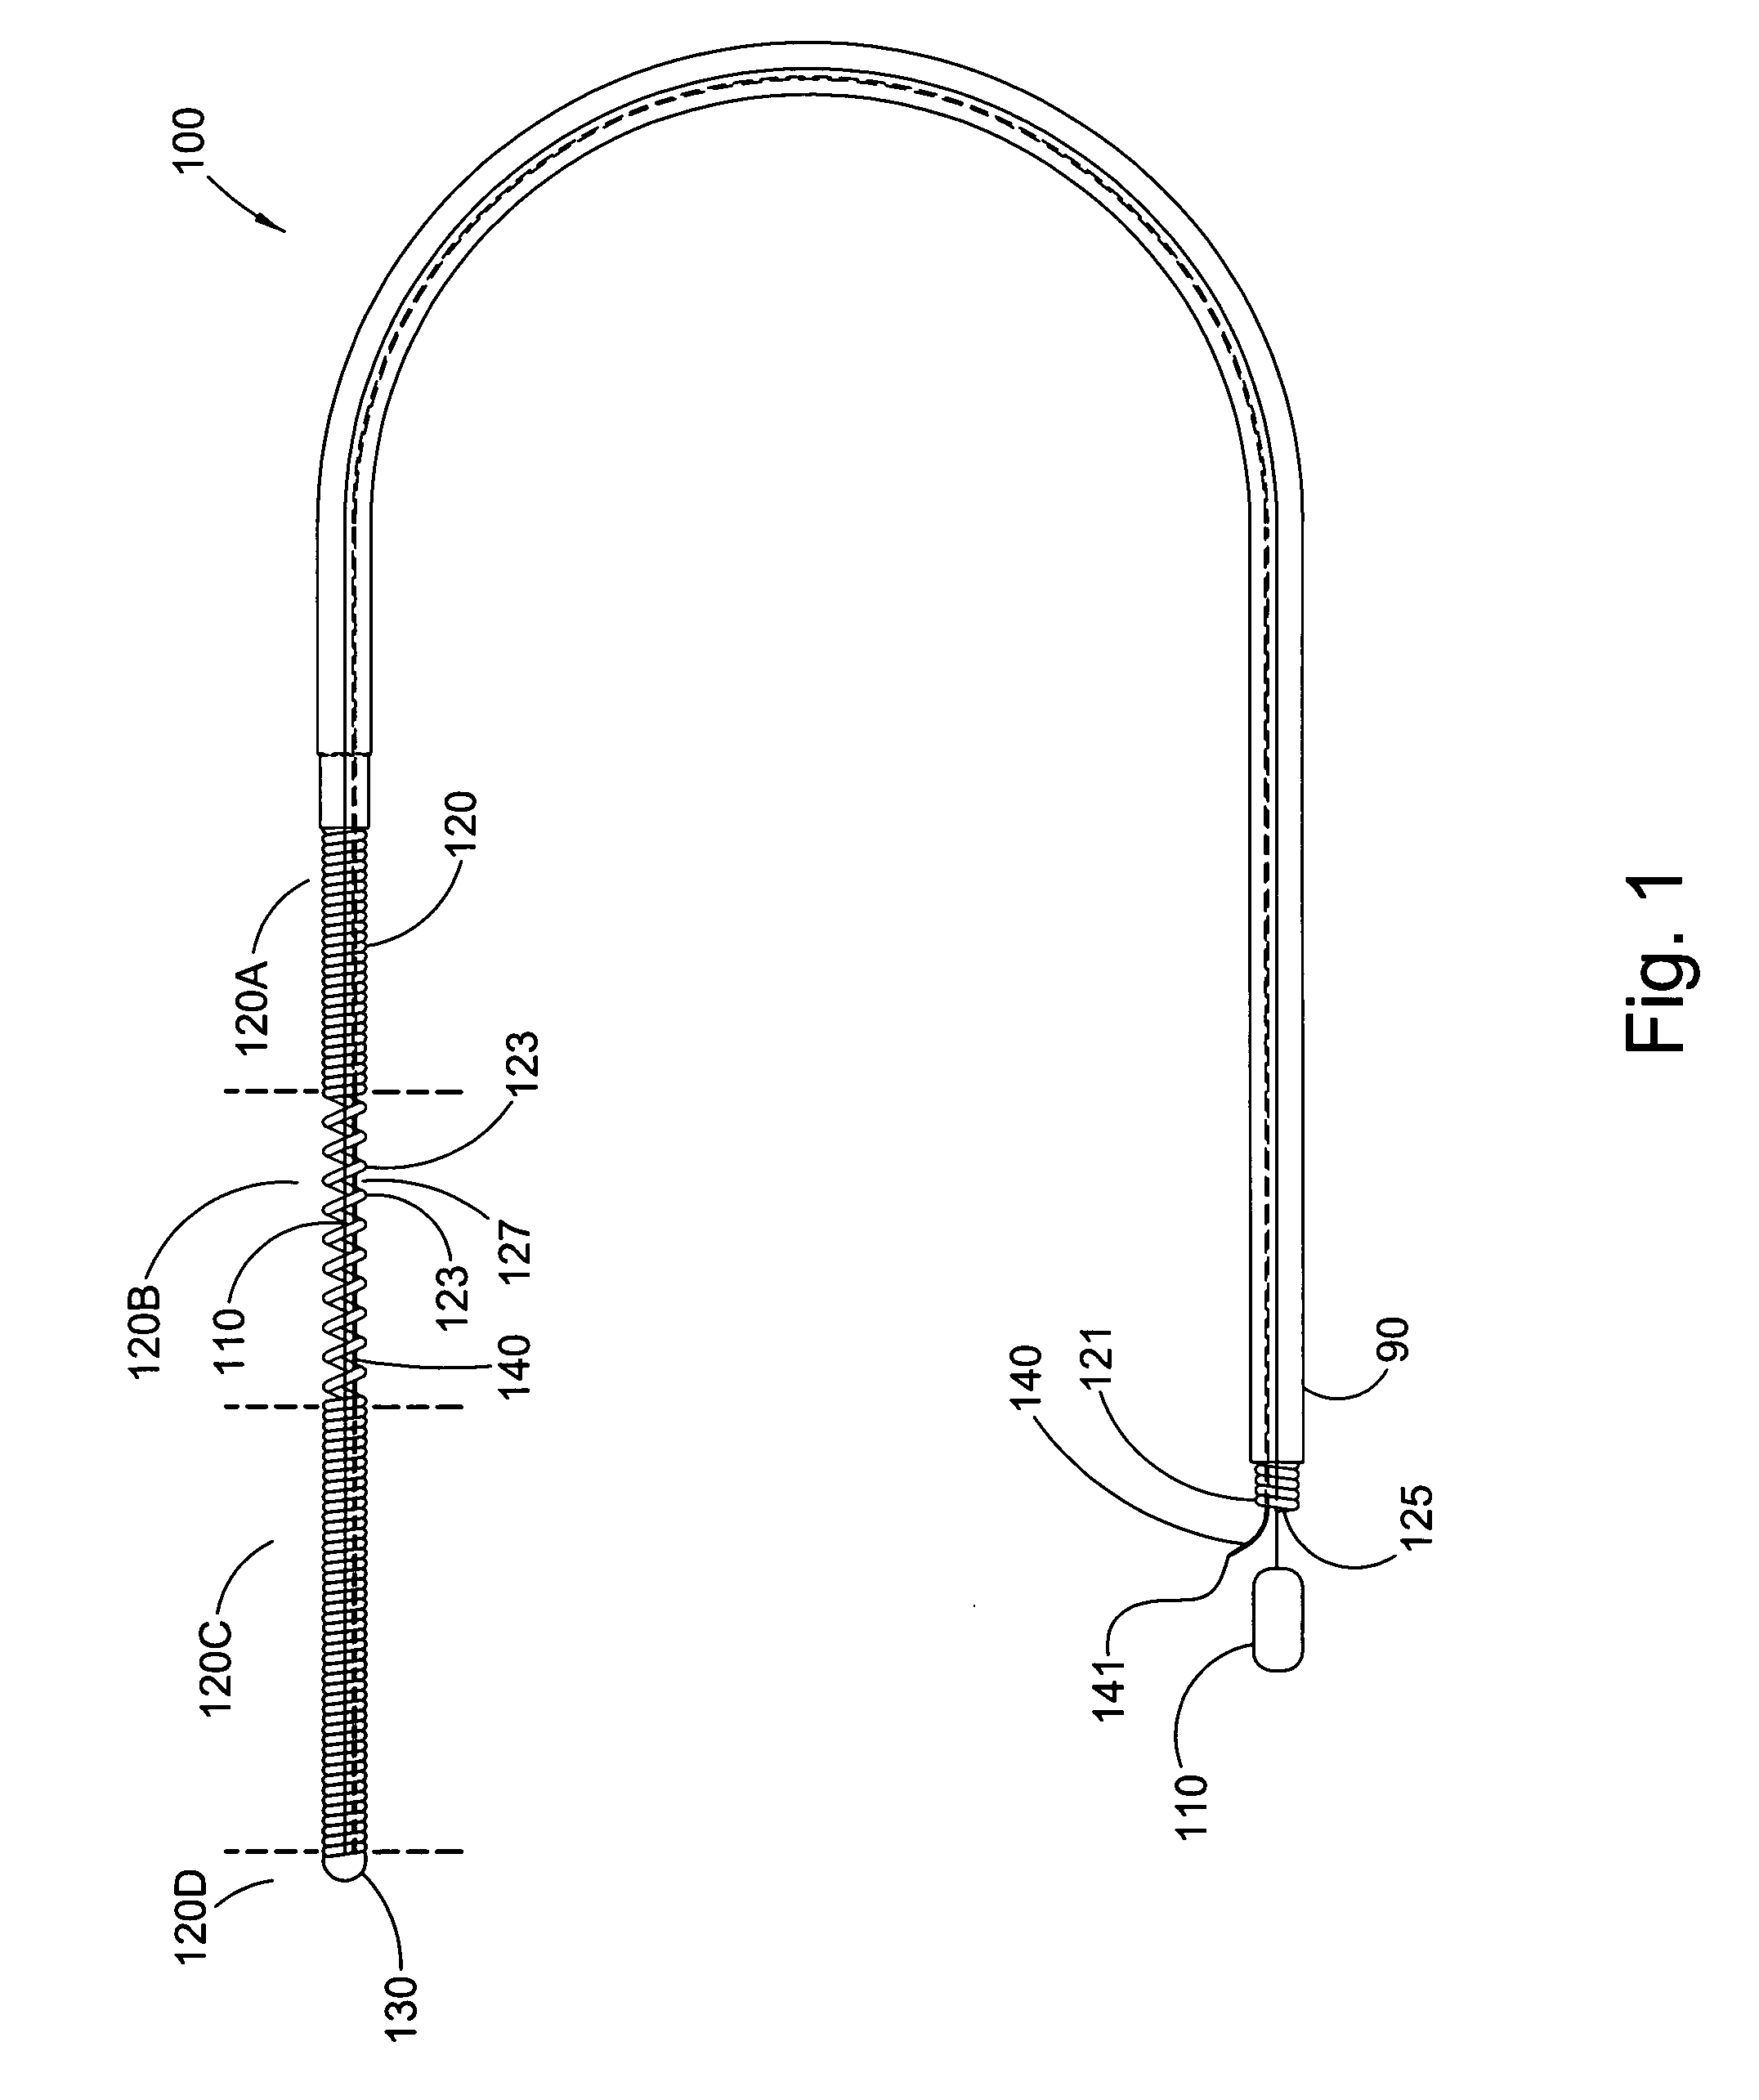 Steerable catheter and method of making the same